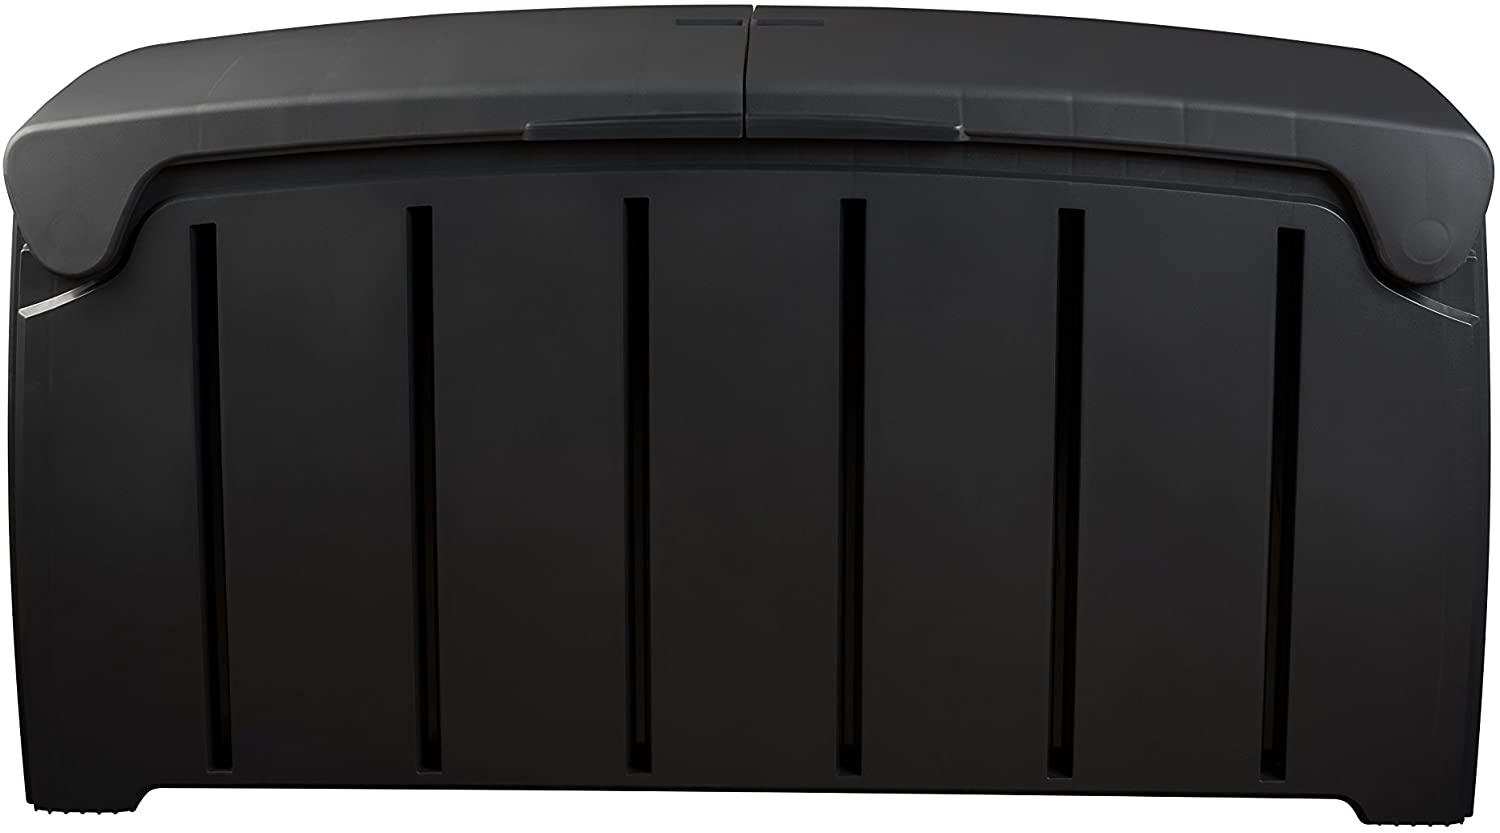 Black 115cm x 55cm x 60cm Butterfly Opening Top 300 Litre Large Garden Storage Box Weatherproof with Padlock Hole